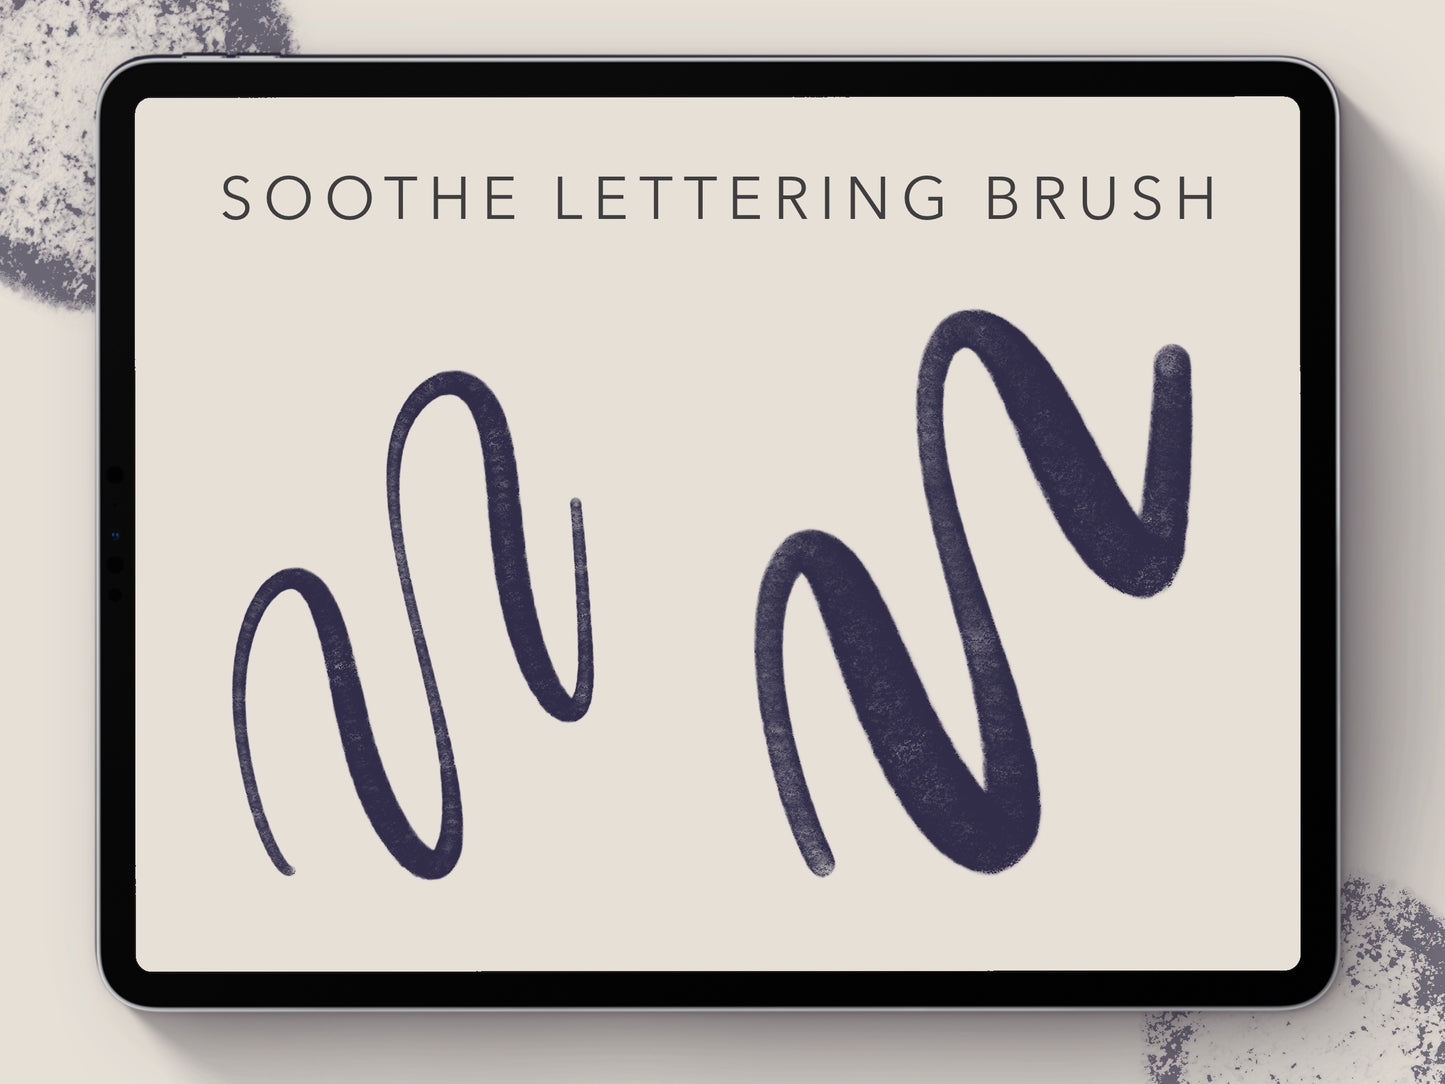 Soothe Brush